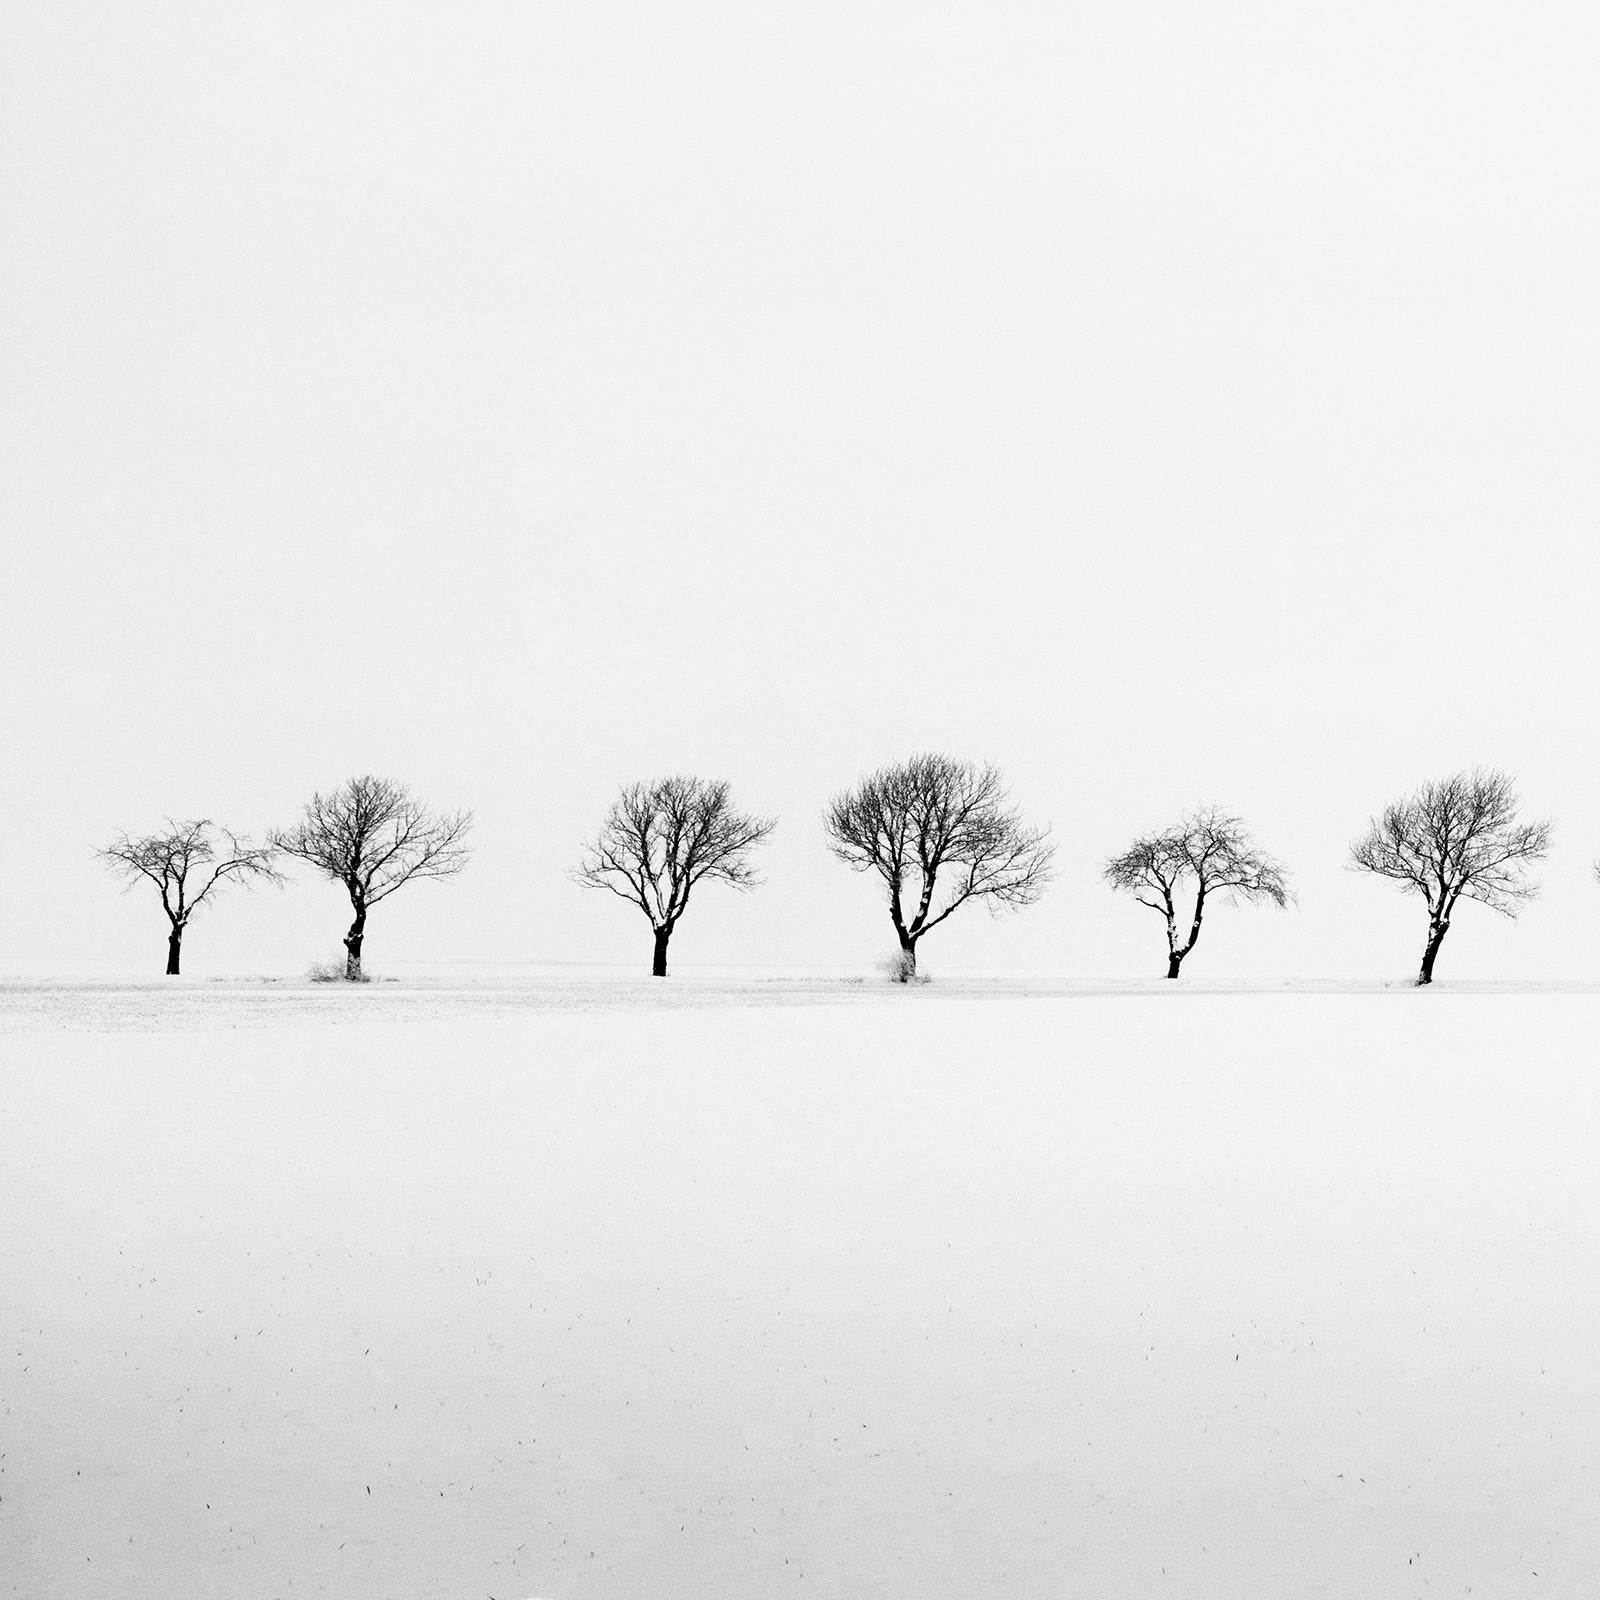 Cherry Trees in Snow Field, minimalist black and white photography, landscape For Sale 2